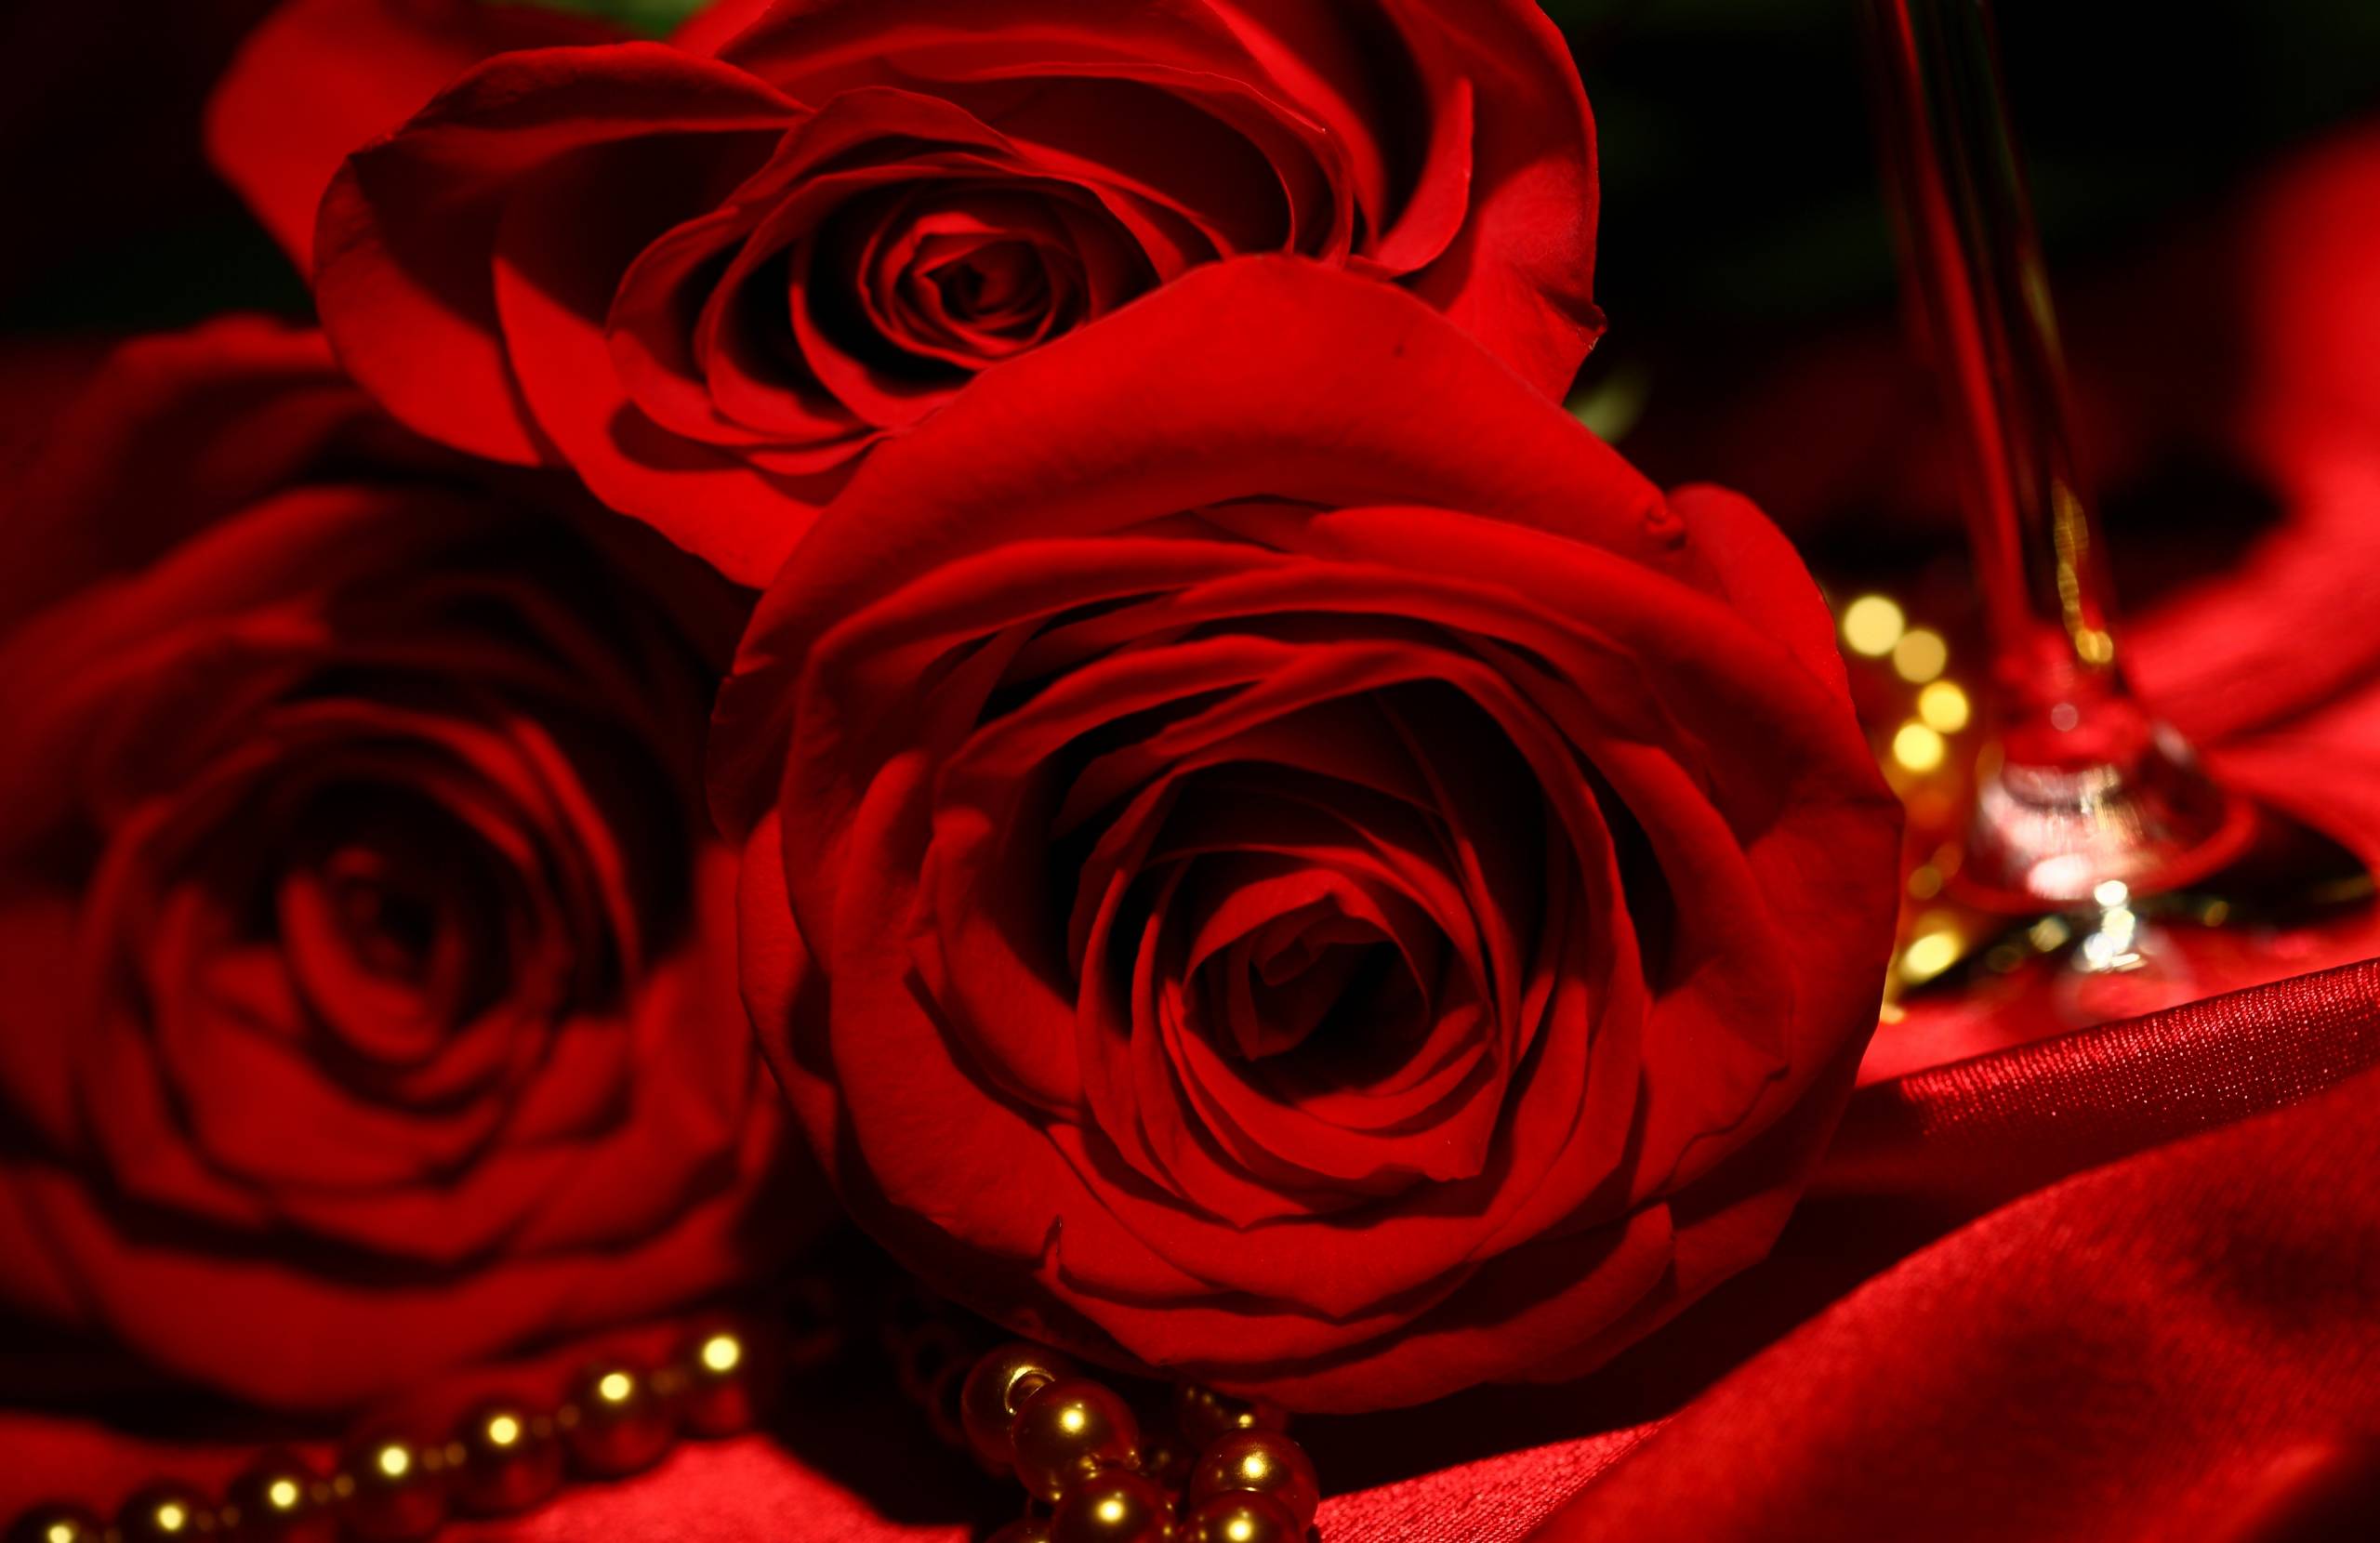 Red roses on March 8 against the backdrop of satin and pearls